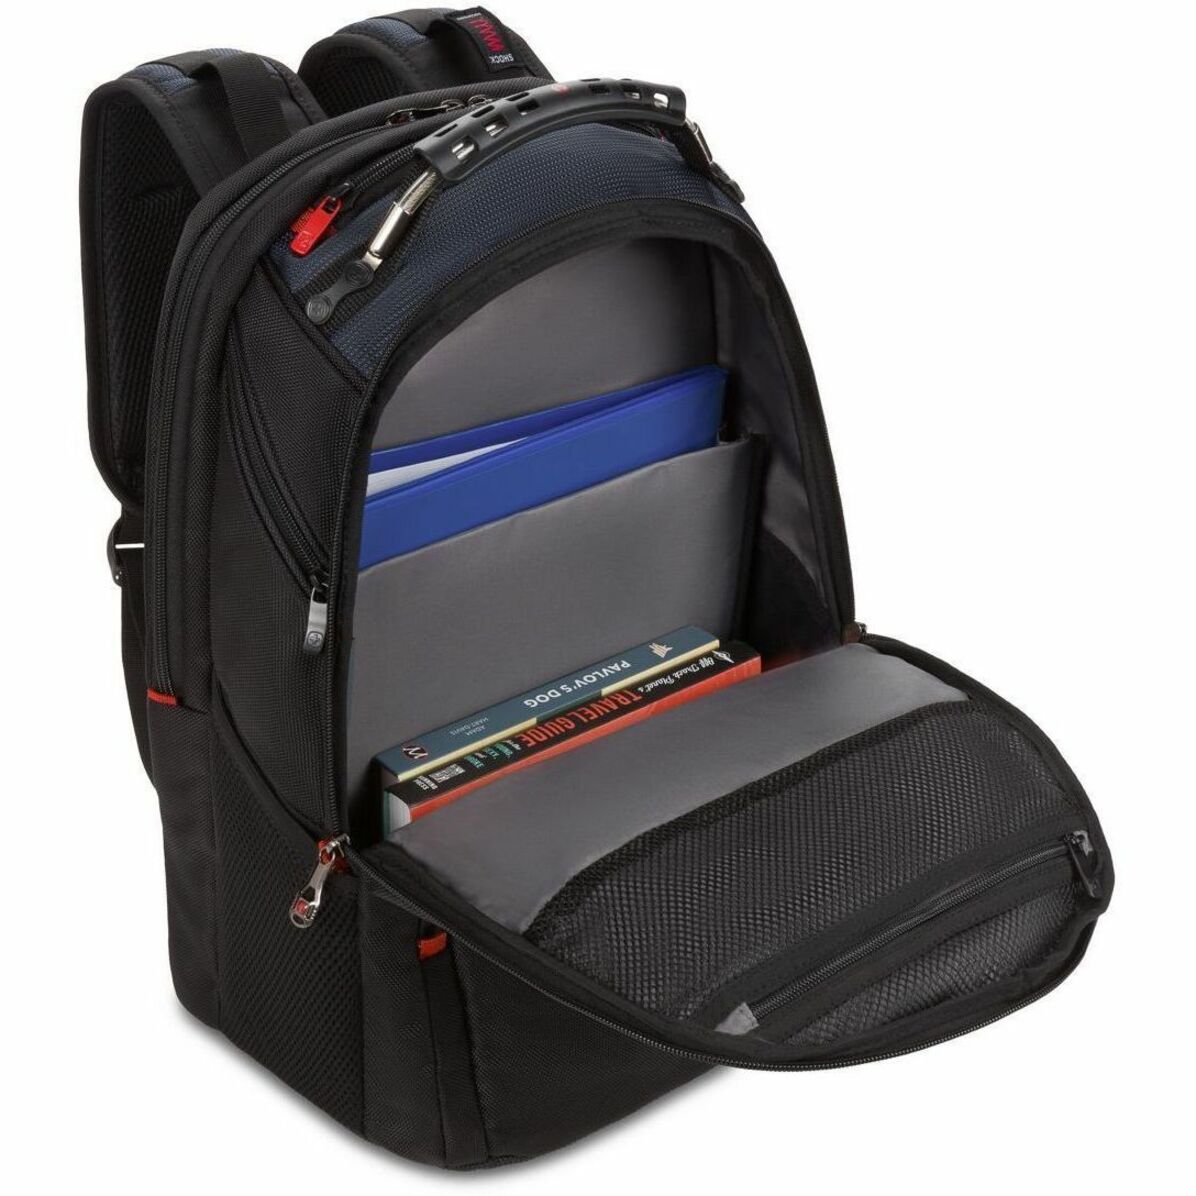 SwissGear 610264 Ibex Pro 16 inch Laptop Backpack, Blue/Black, Fits up to a 16" Laptop